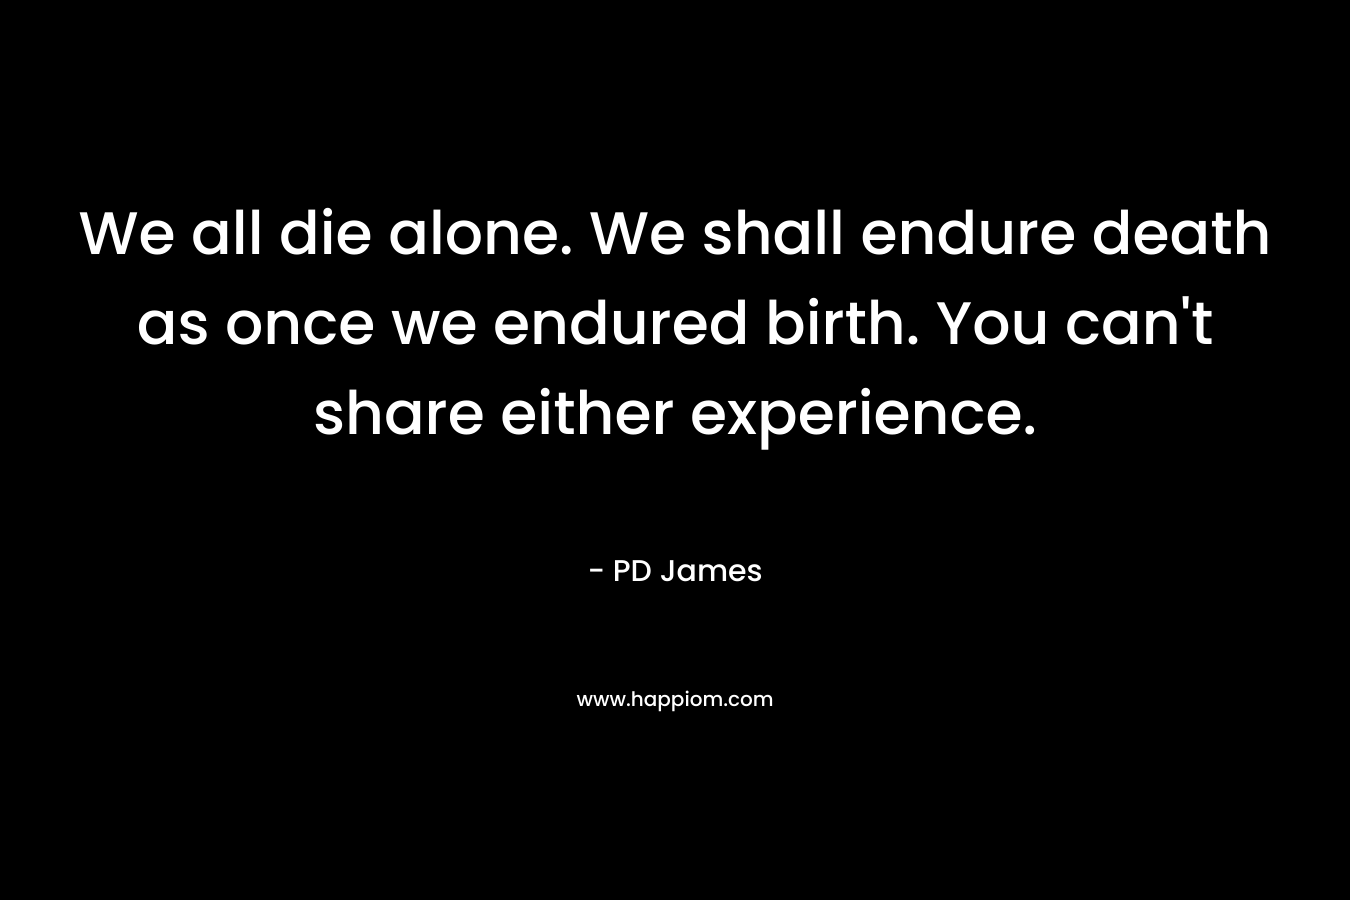 We all die alone. We shall endure death as once we endured birth. You can’t share either experience. – PD James